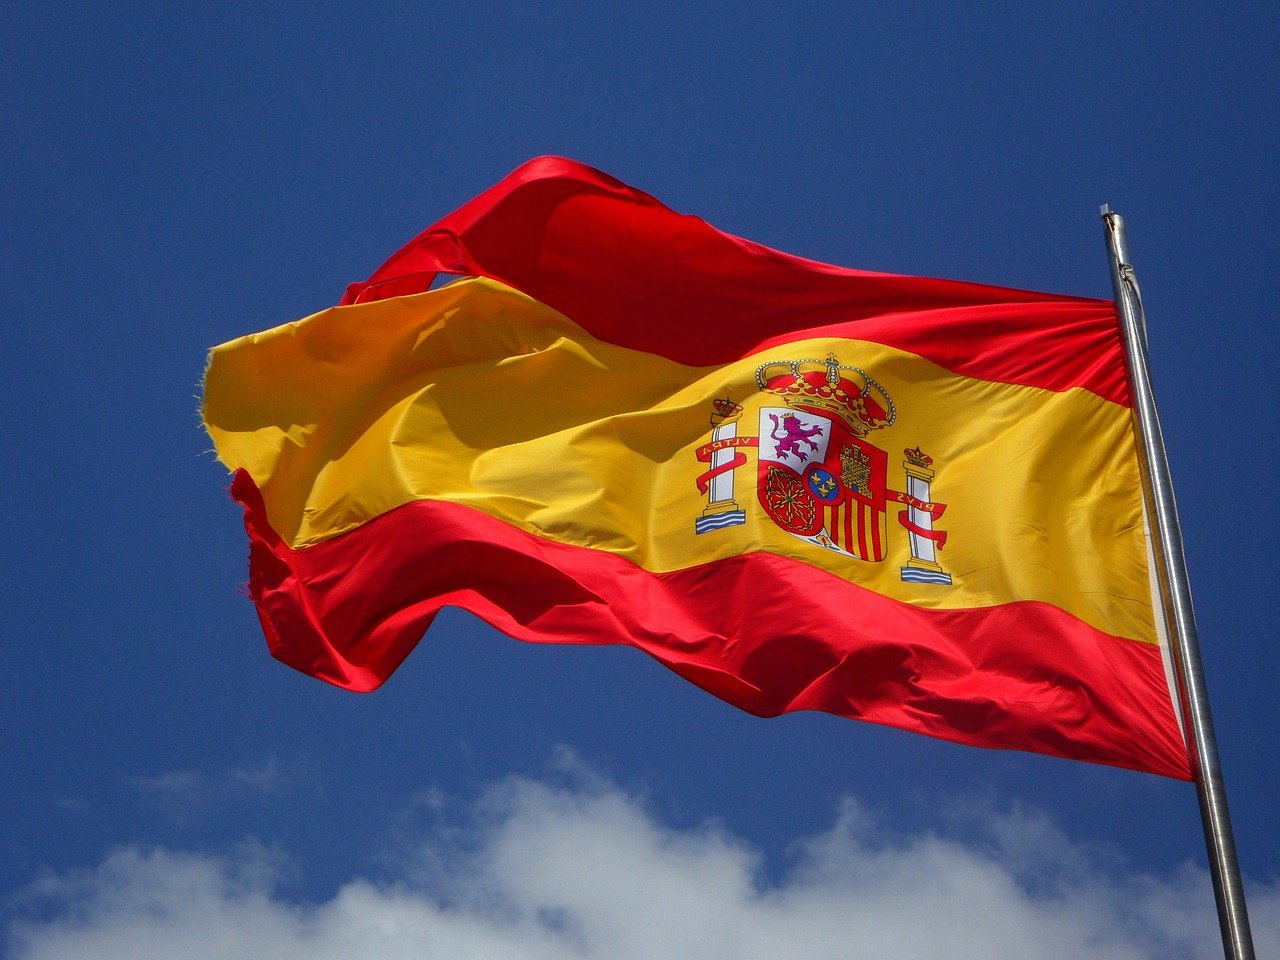 The Spanish Democratic Memory Law: Theory and Implementation